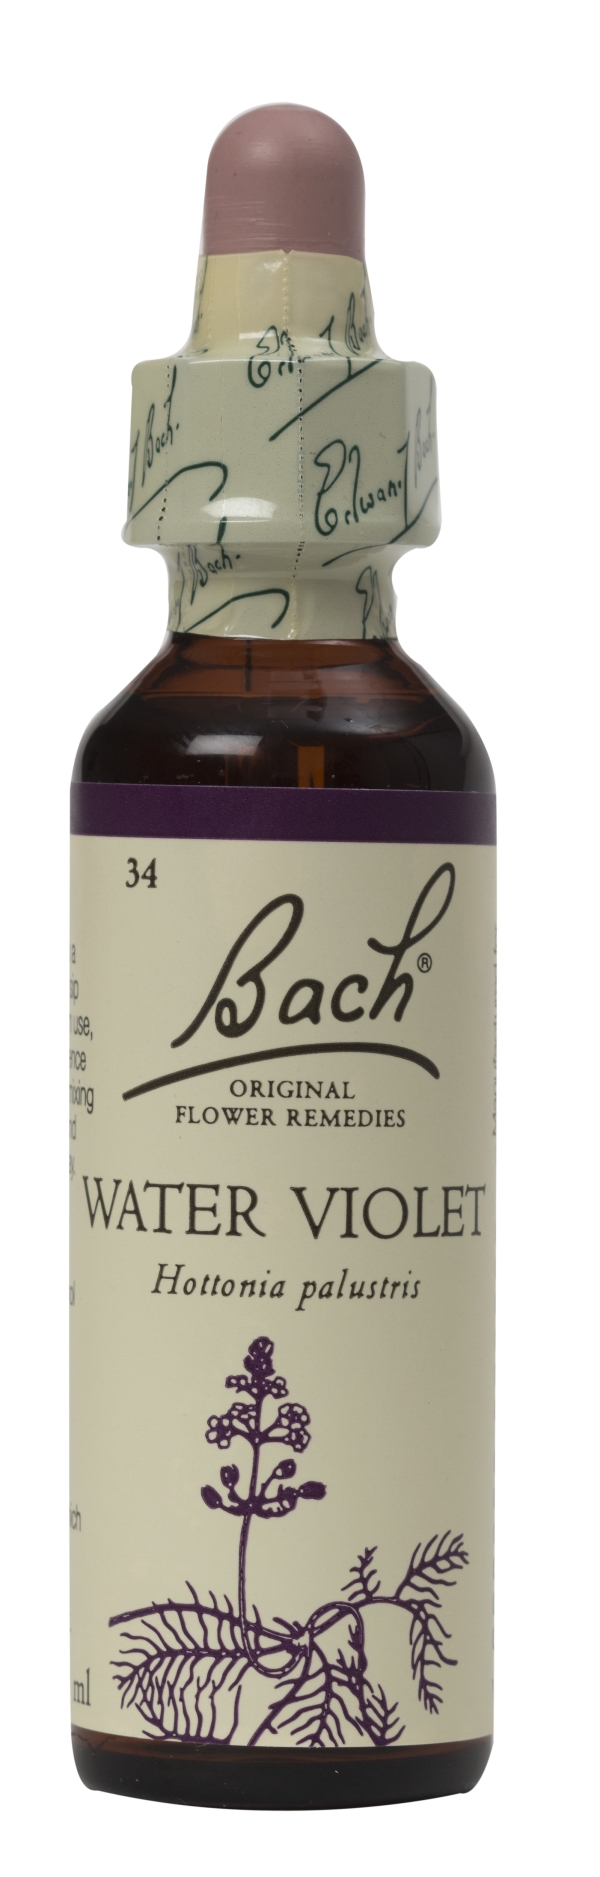 Nelson Bach Flower Remedies: Bach Water Violet Flower Remedy (20ml) available online here